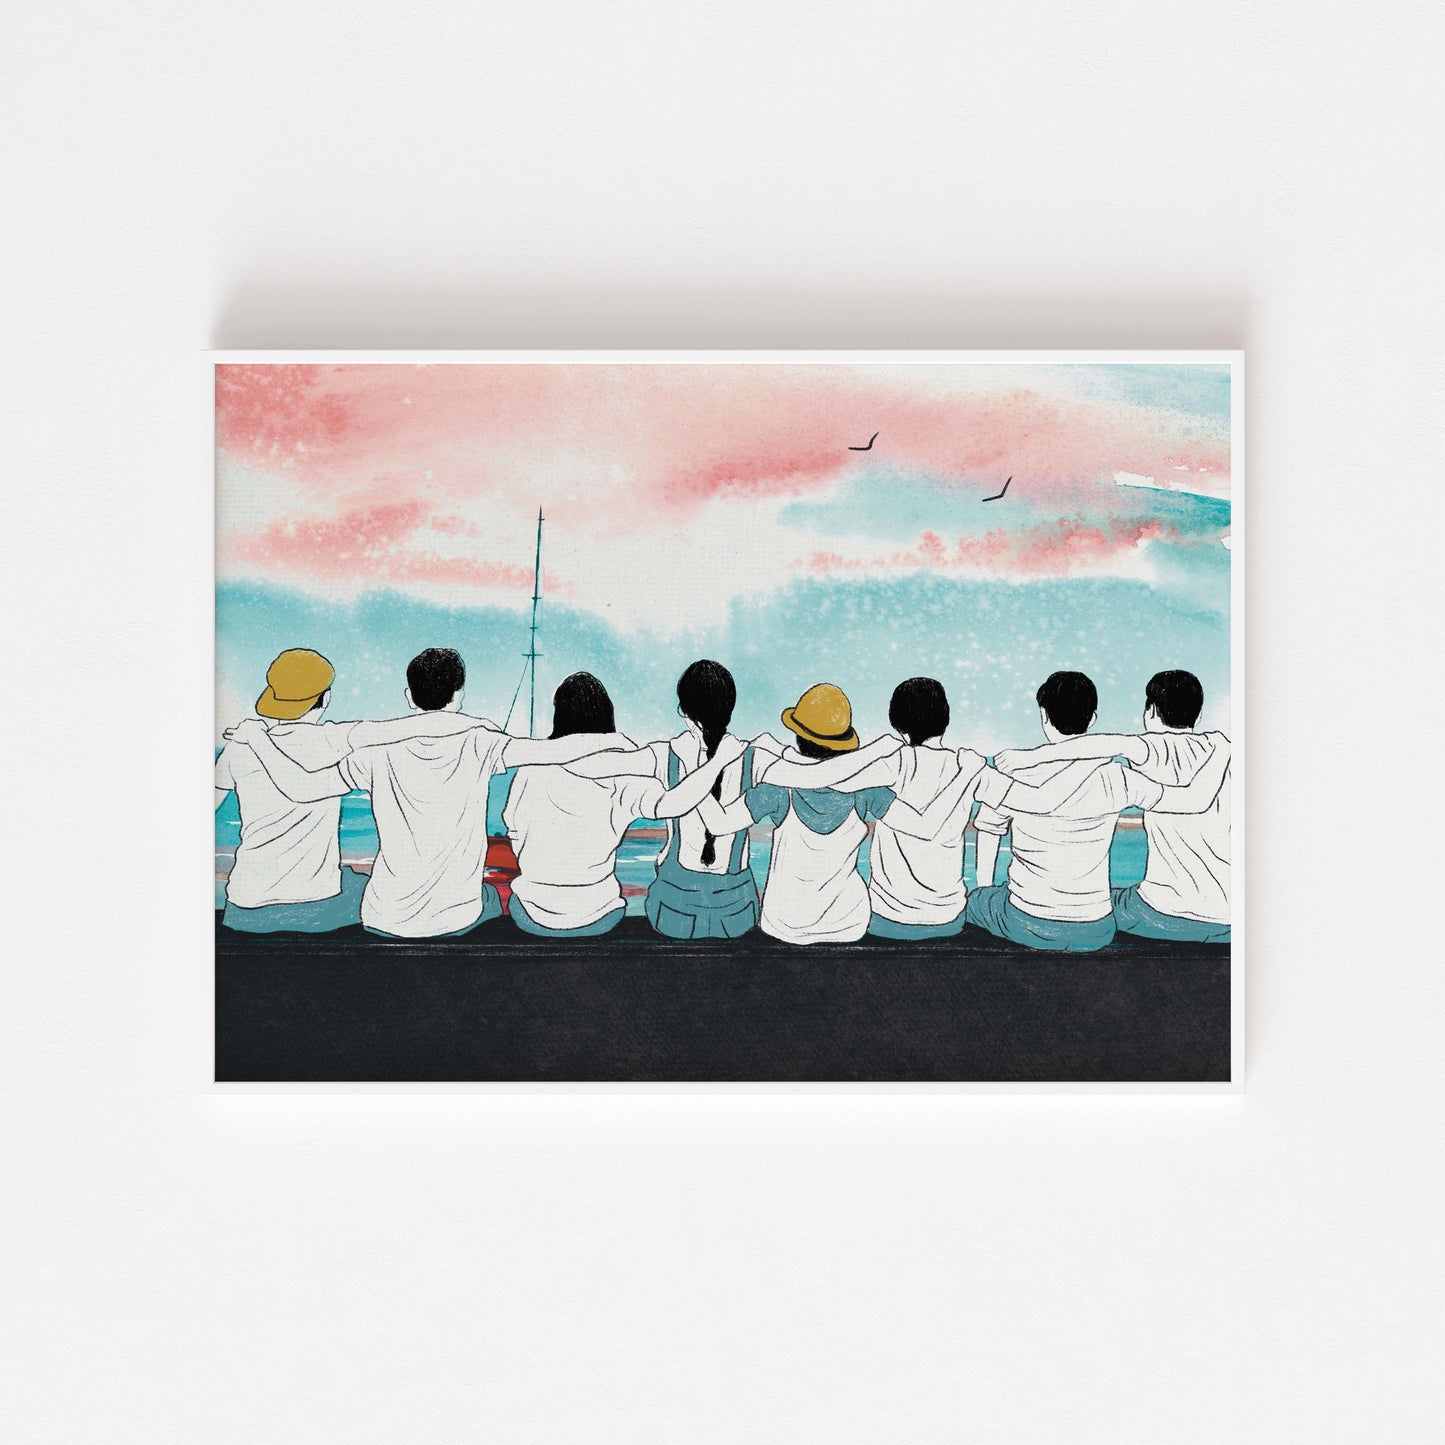 Friends sitting together by the sea poster in white frame mockup